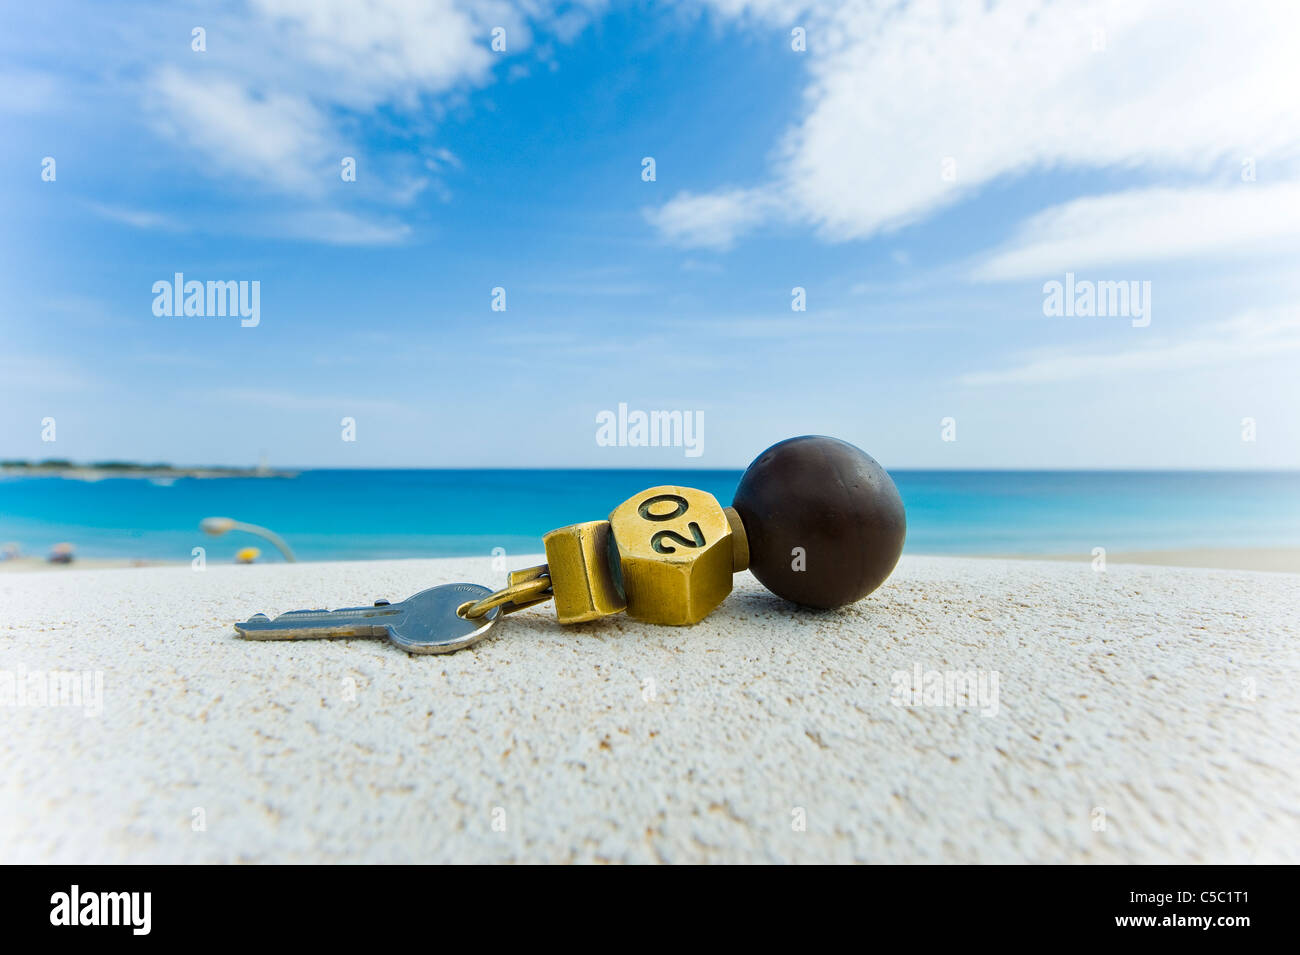 Close-up of hotel key on the sand with blue sea in the background at a beach Stock Photo